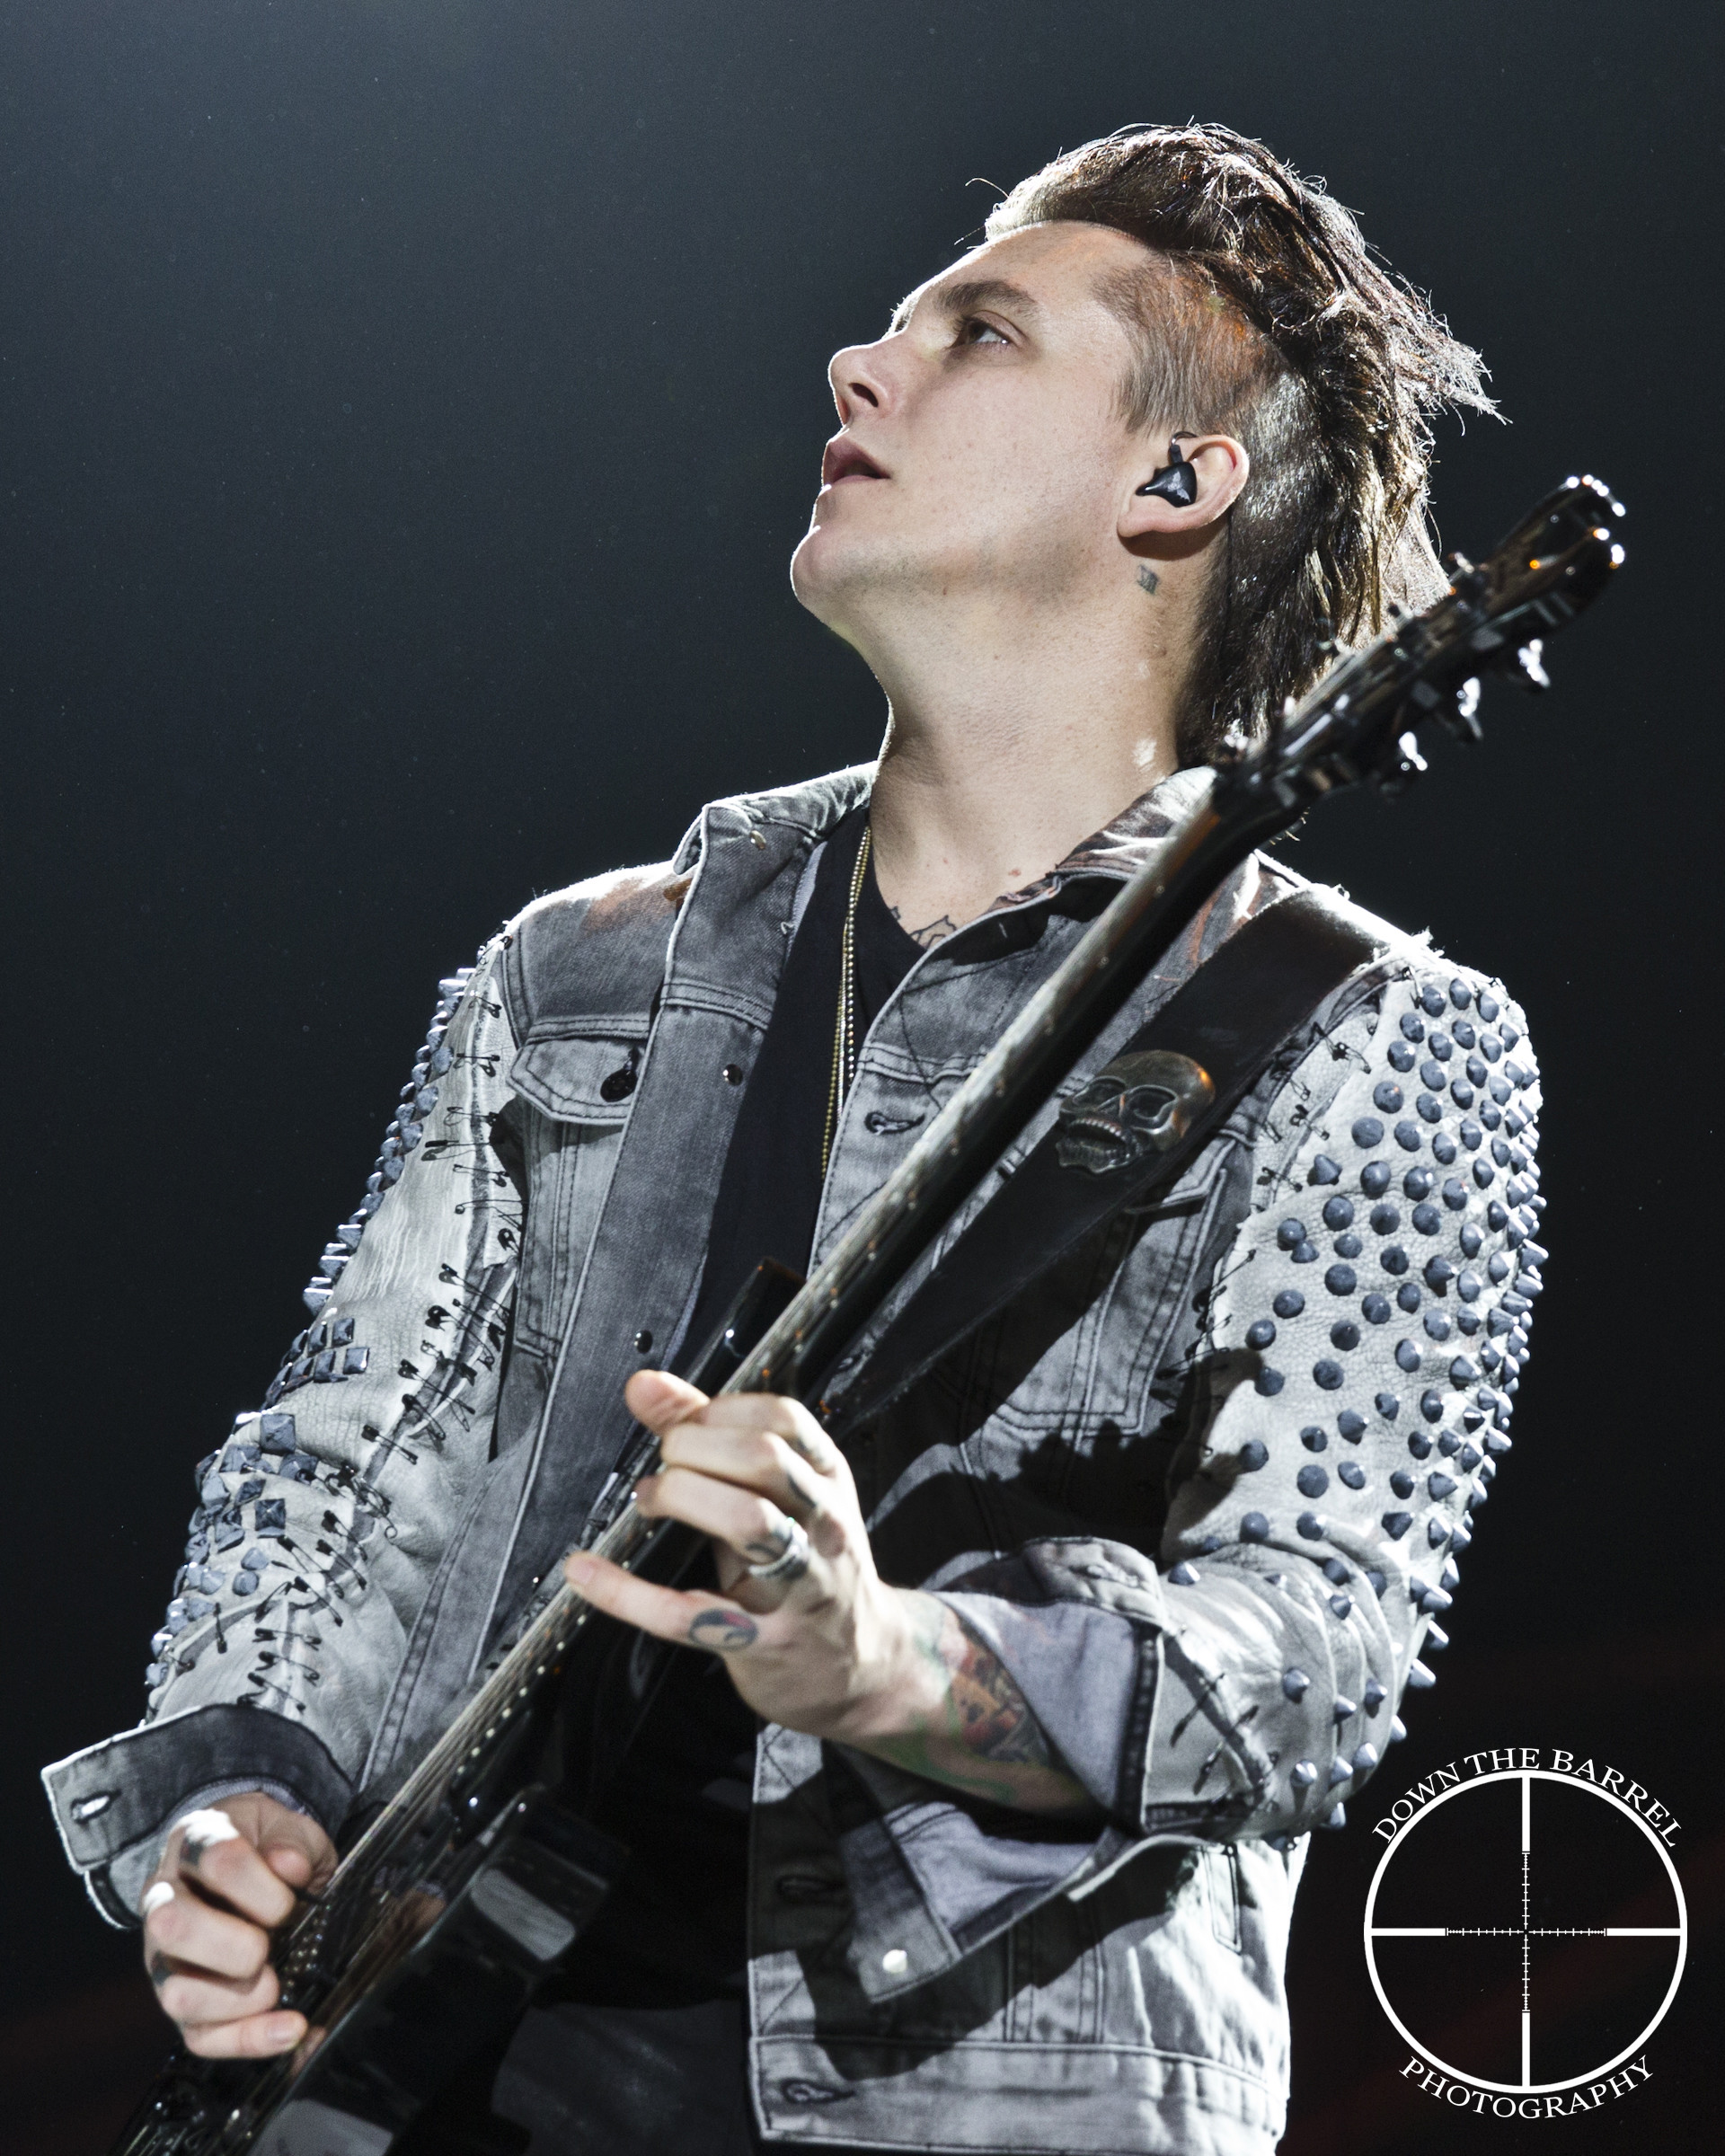 Synyster Gates 2018 Wa - Avenged Sevenfold Synyster Gates , HD Wallpaper & Backgrounds